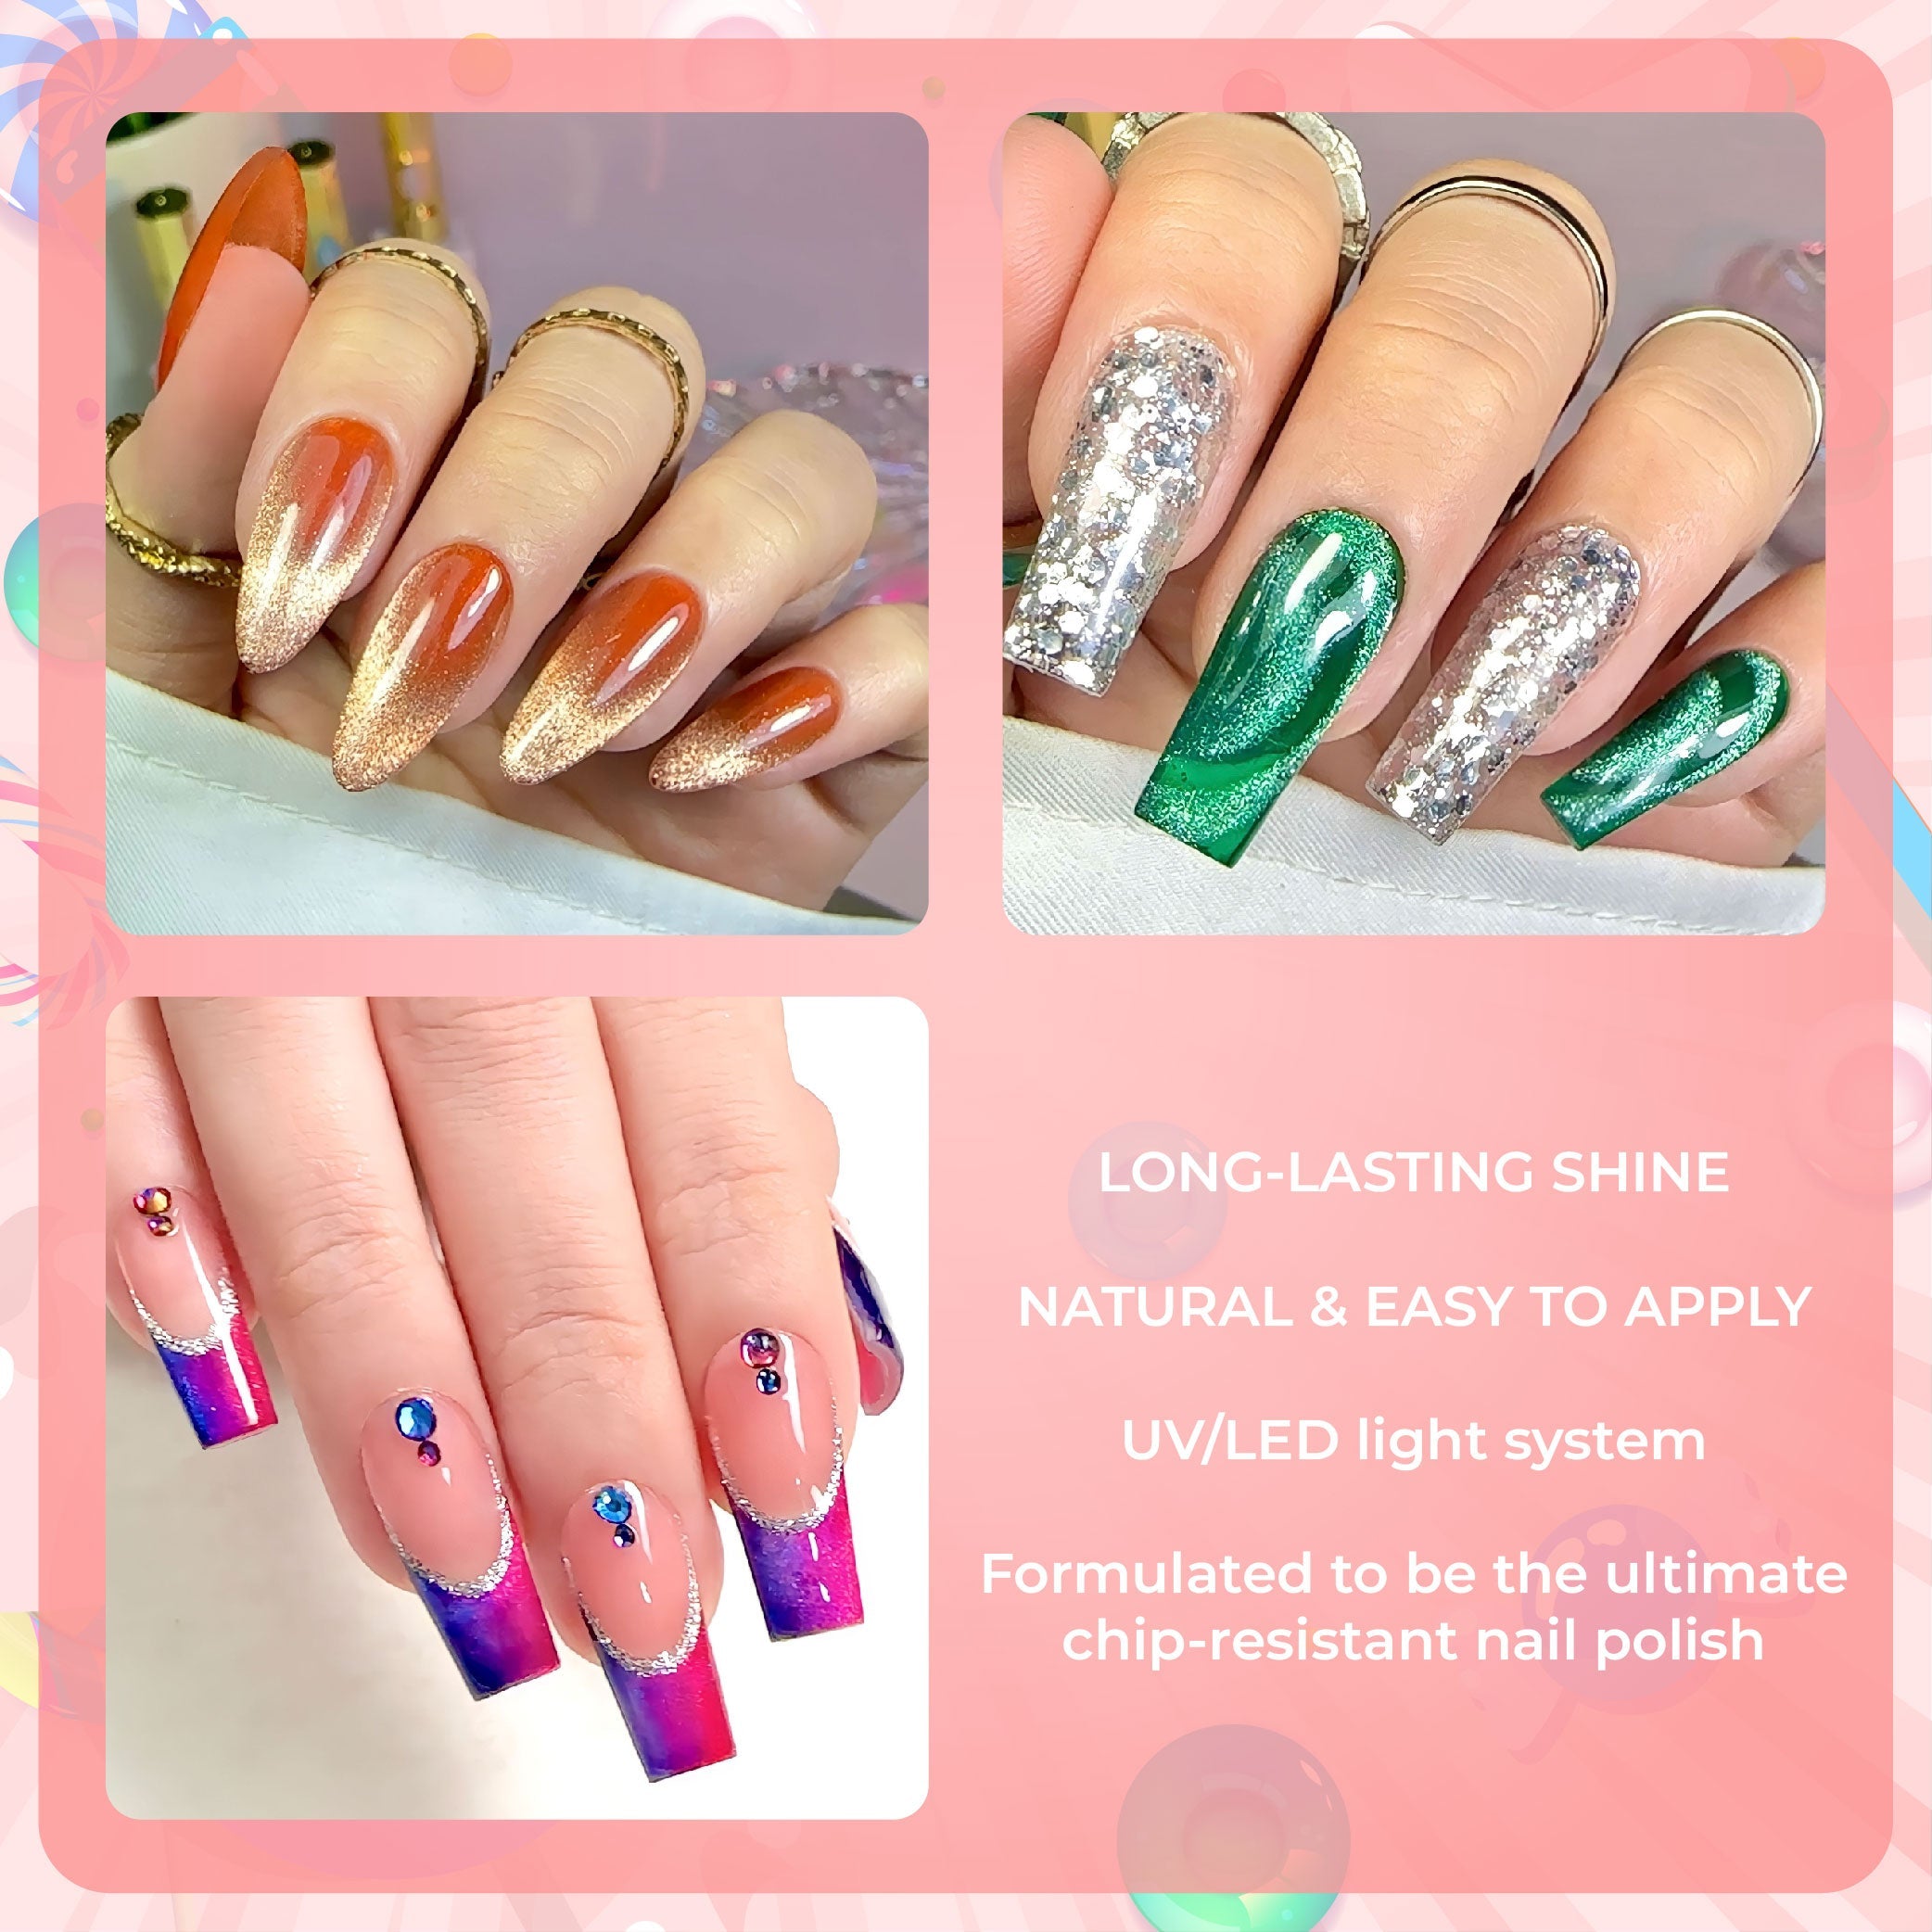 Jelly Gel Polish Colors - Lavis J02-21 - Candy Collection